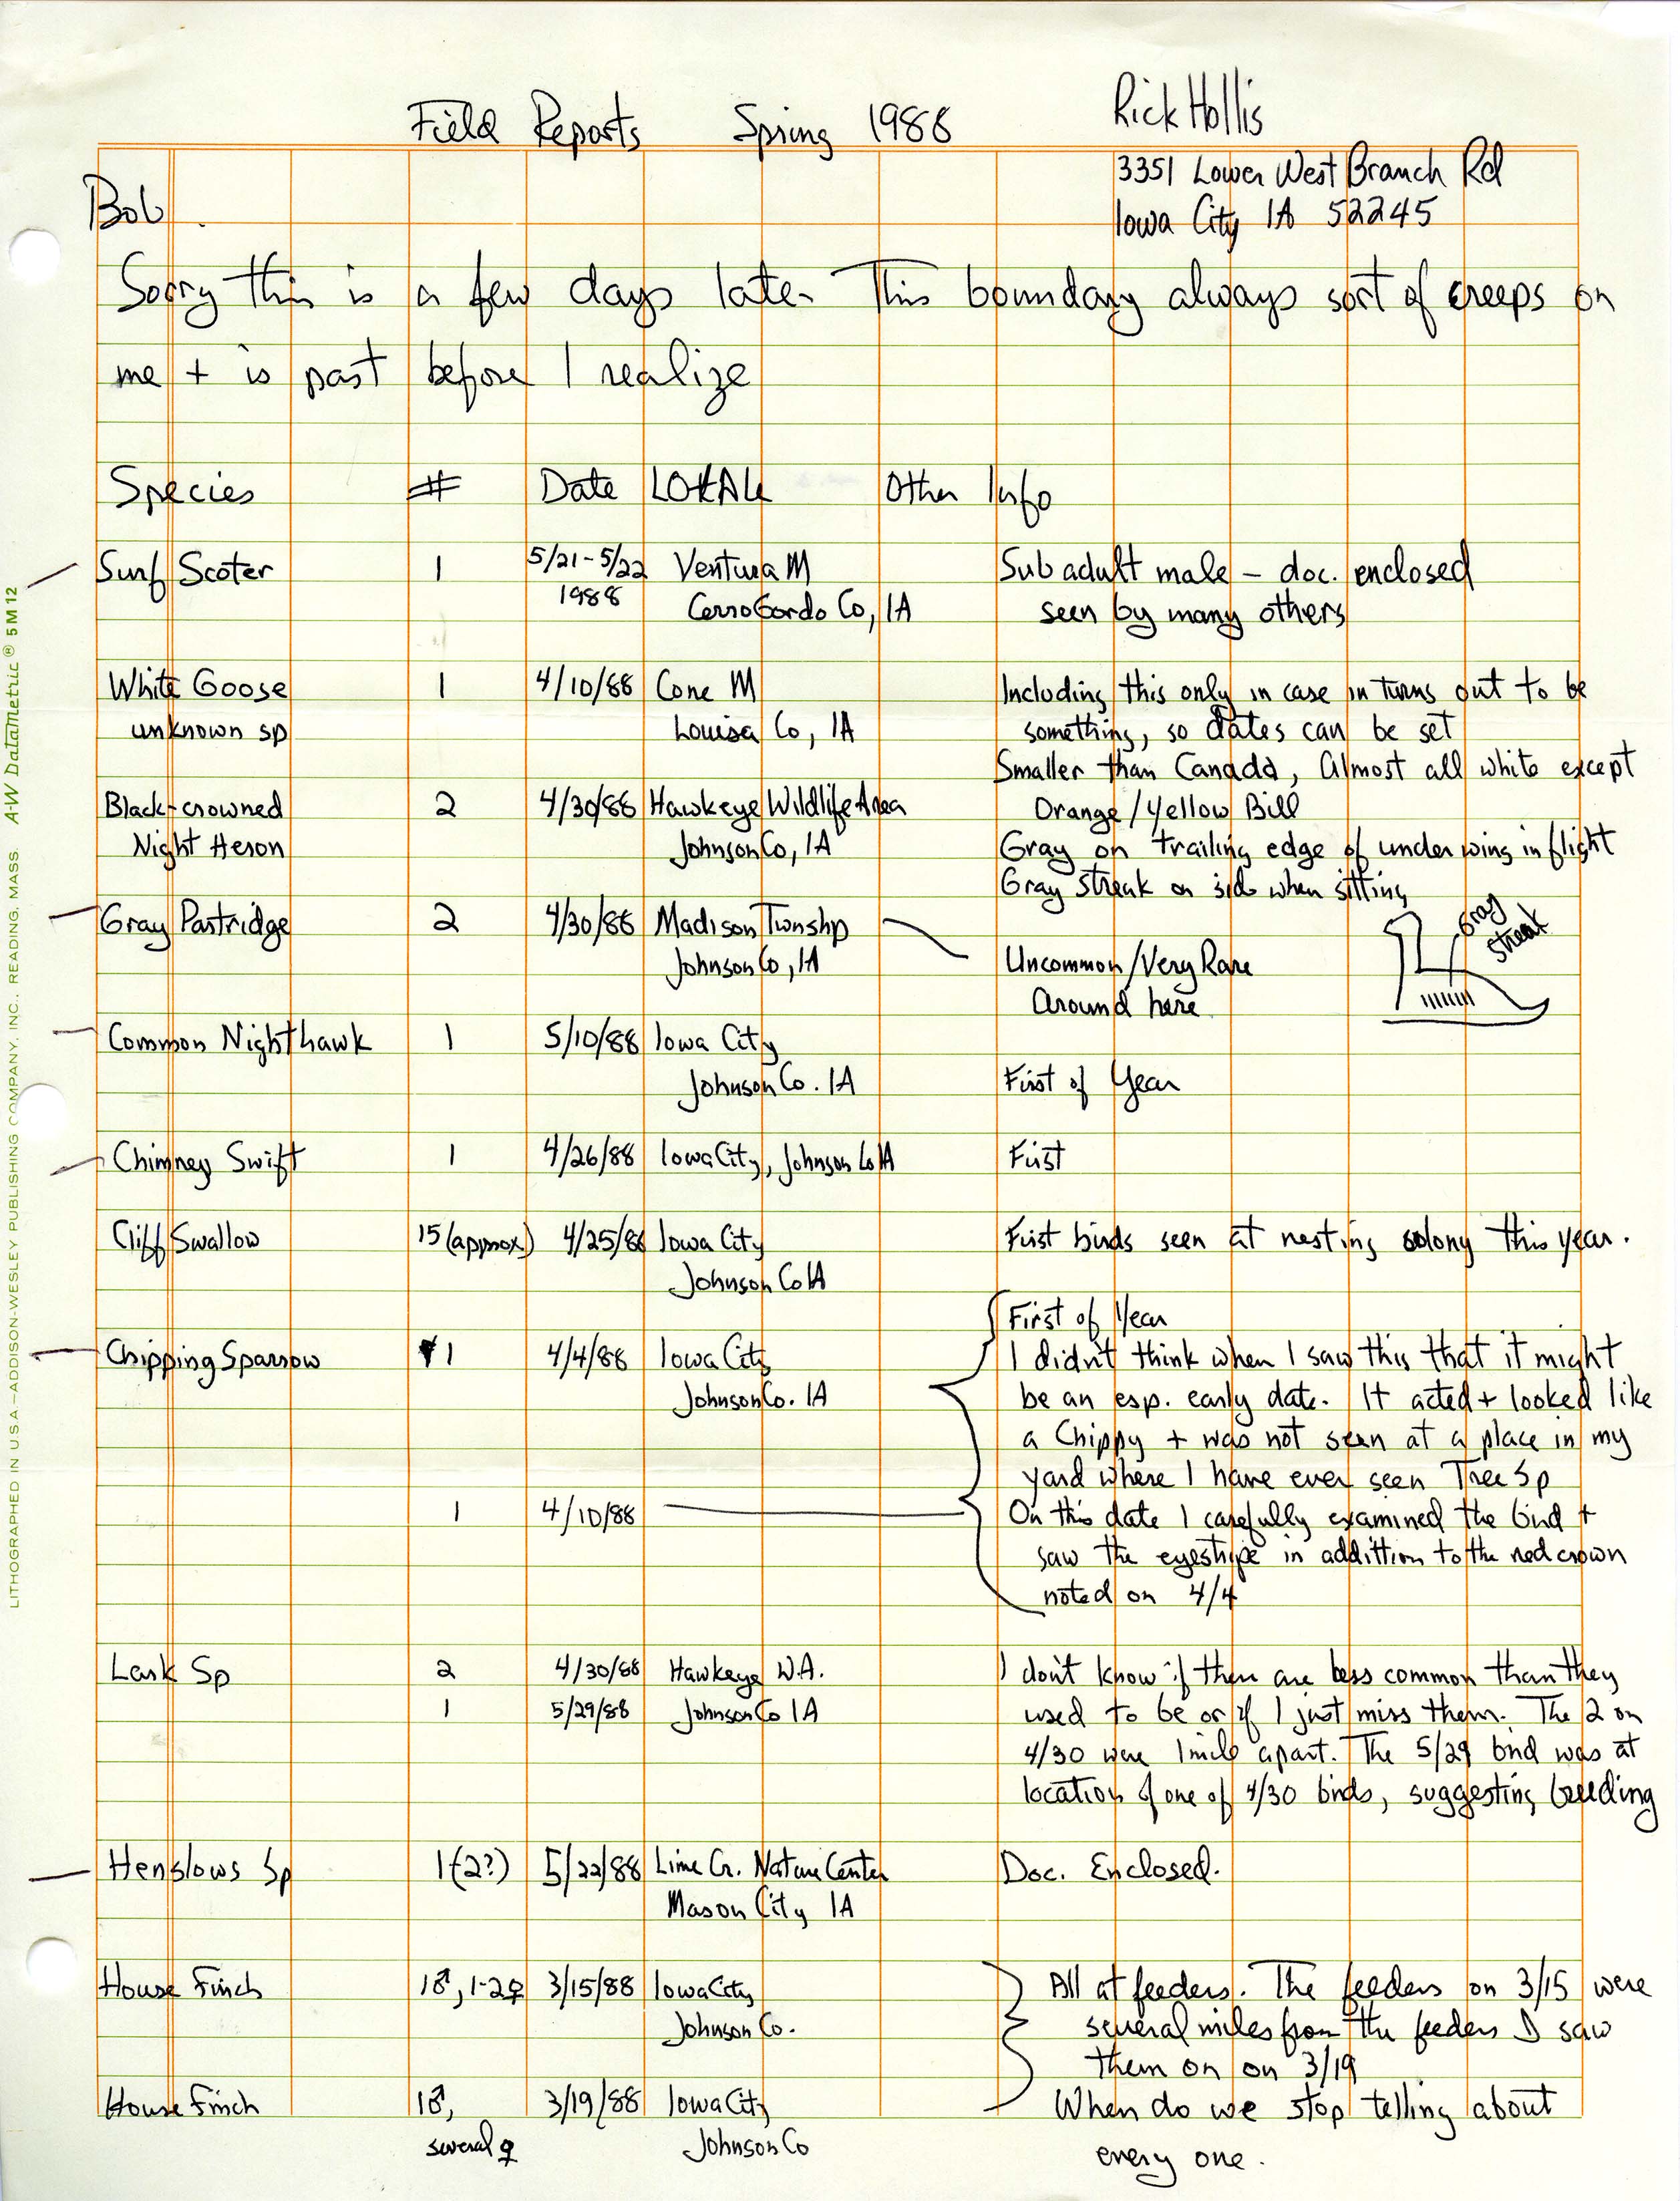 Field notes contributed by Richard Jule Hollis, spring 1988